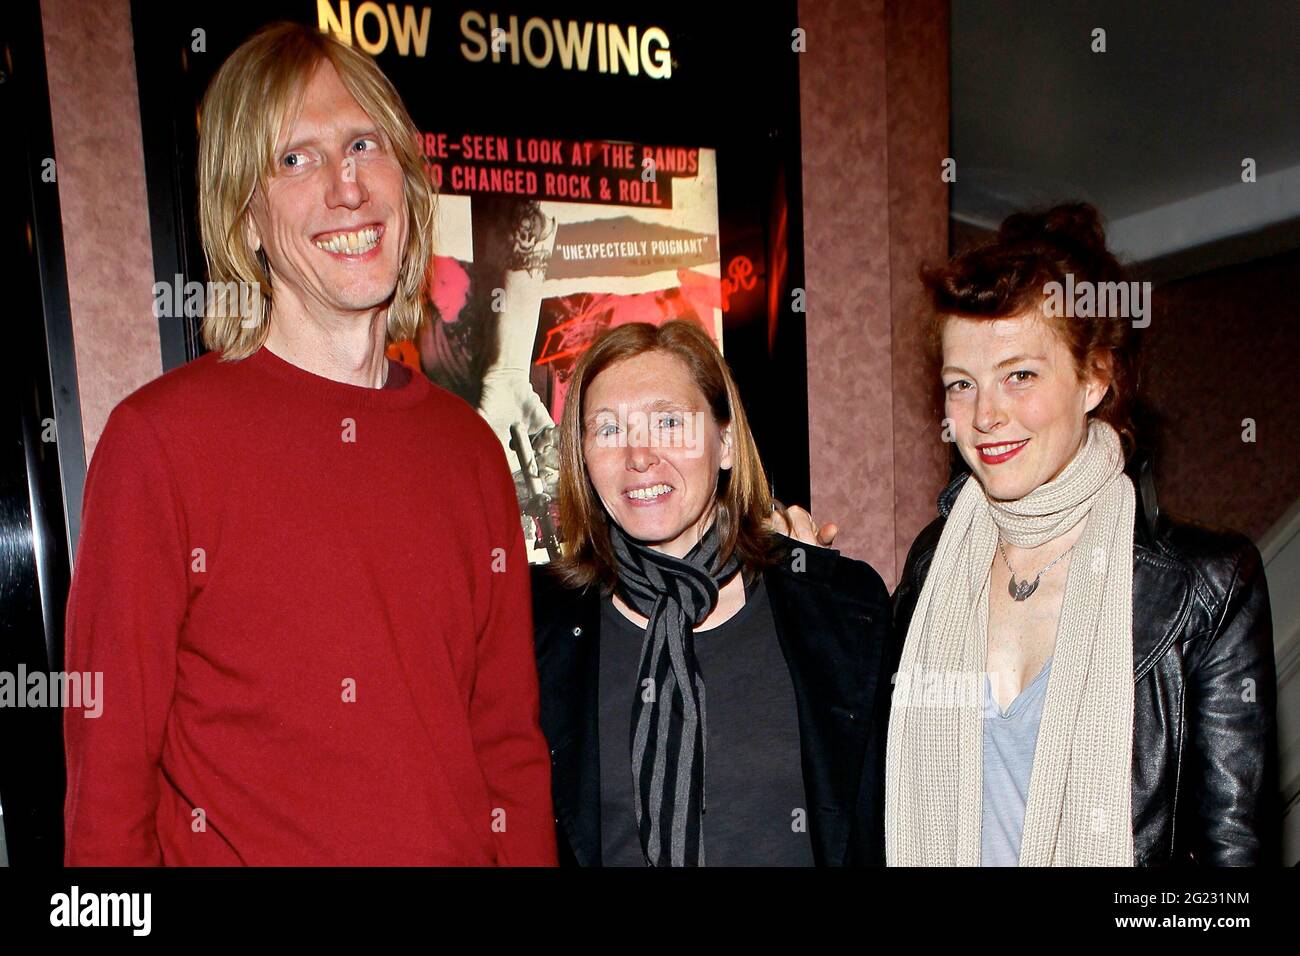 New York, NY, USA. 13 April, 2012. (L-R) Film subjects, musicians of the alternative American rock group Hole, Eric Erlandson, Patty Schemel, Melissa auf der Maur at the 'Hit So Hard' Documentary Q & A With Members Of The Band Hole at Cinema Village Cinema. Credit: Steve Mack/Alamy Stock Photo